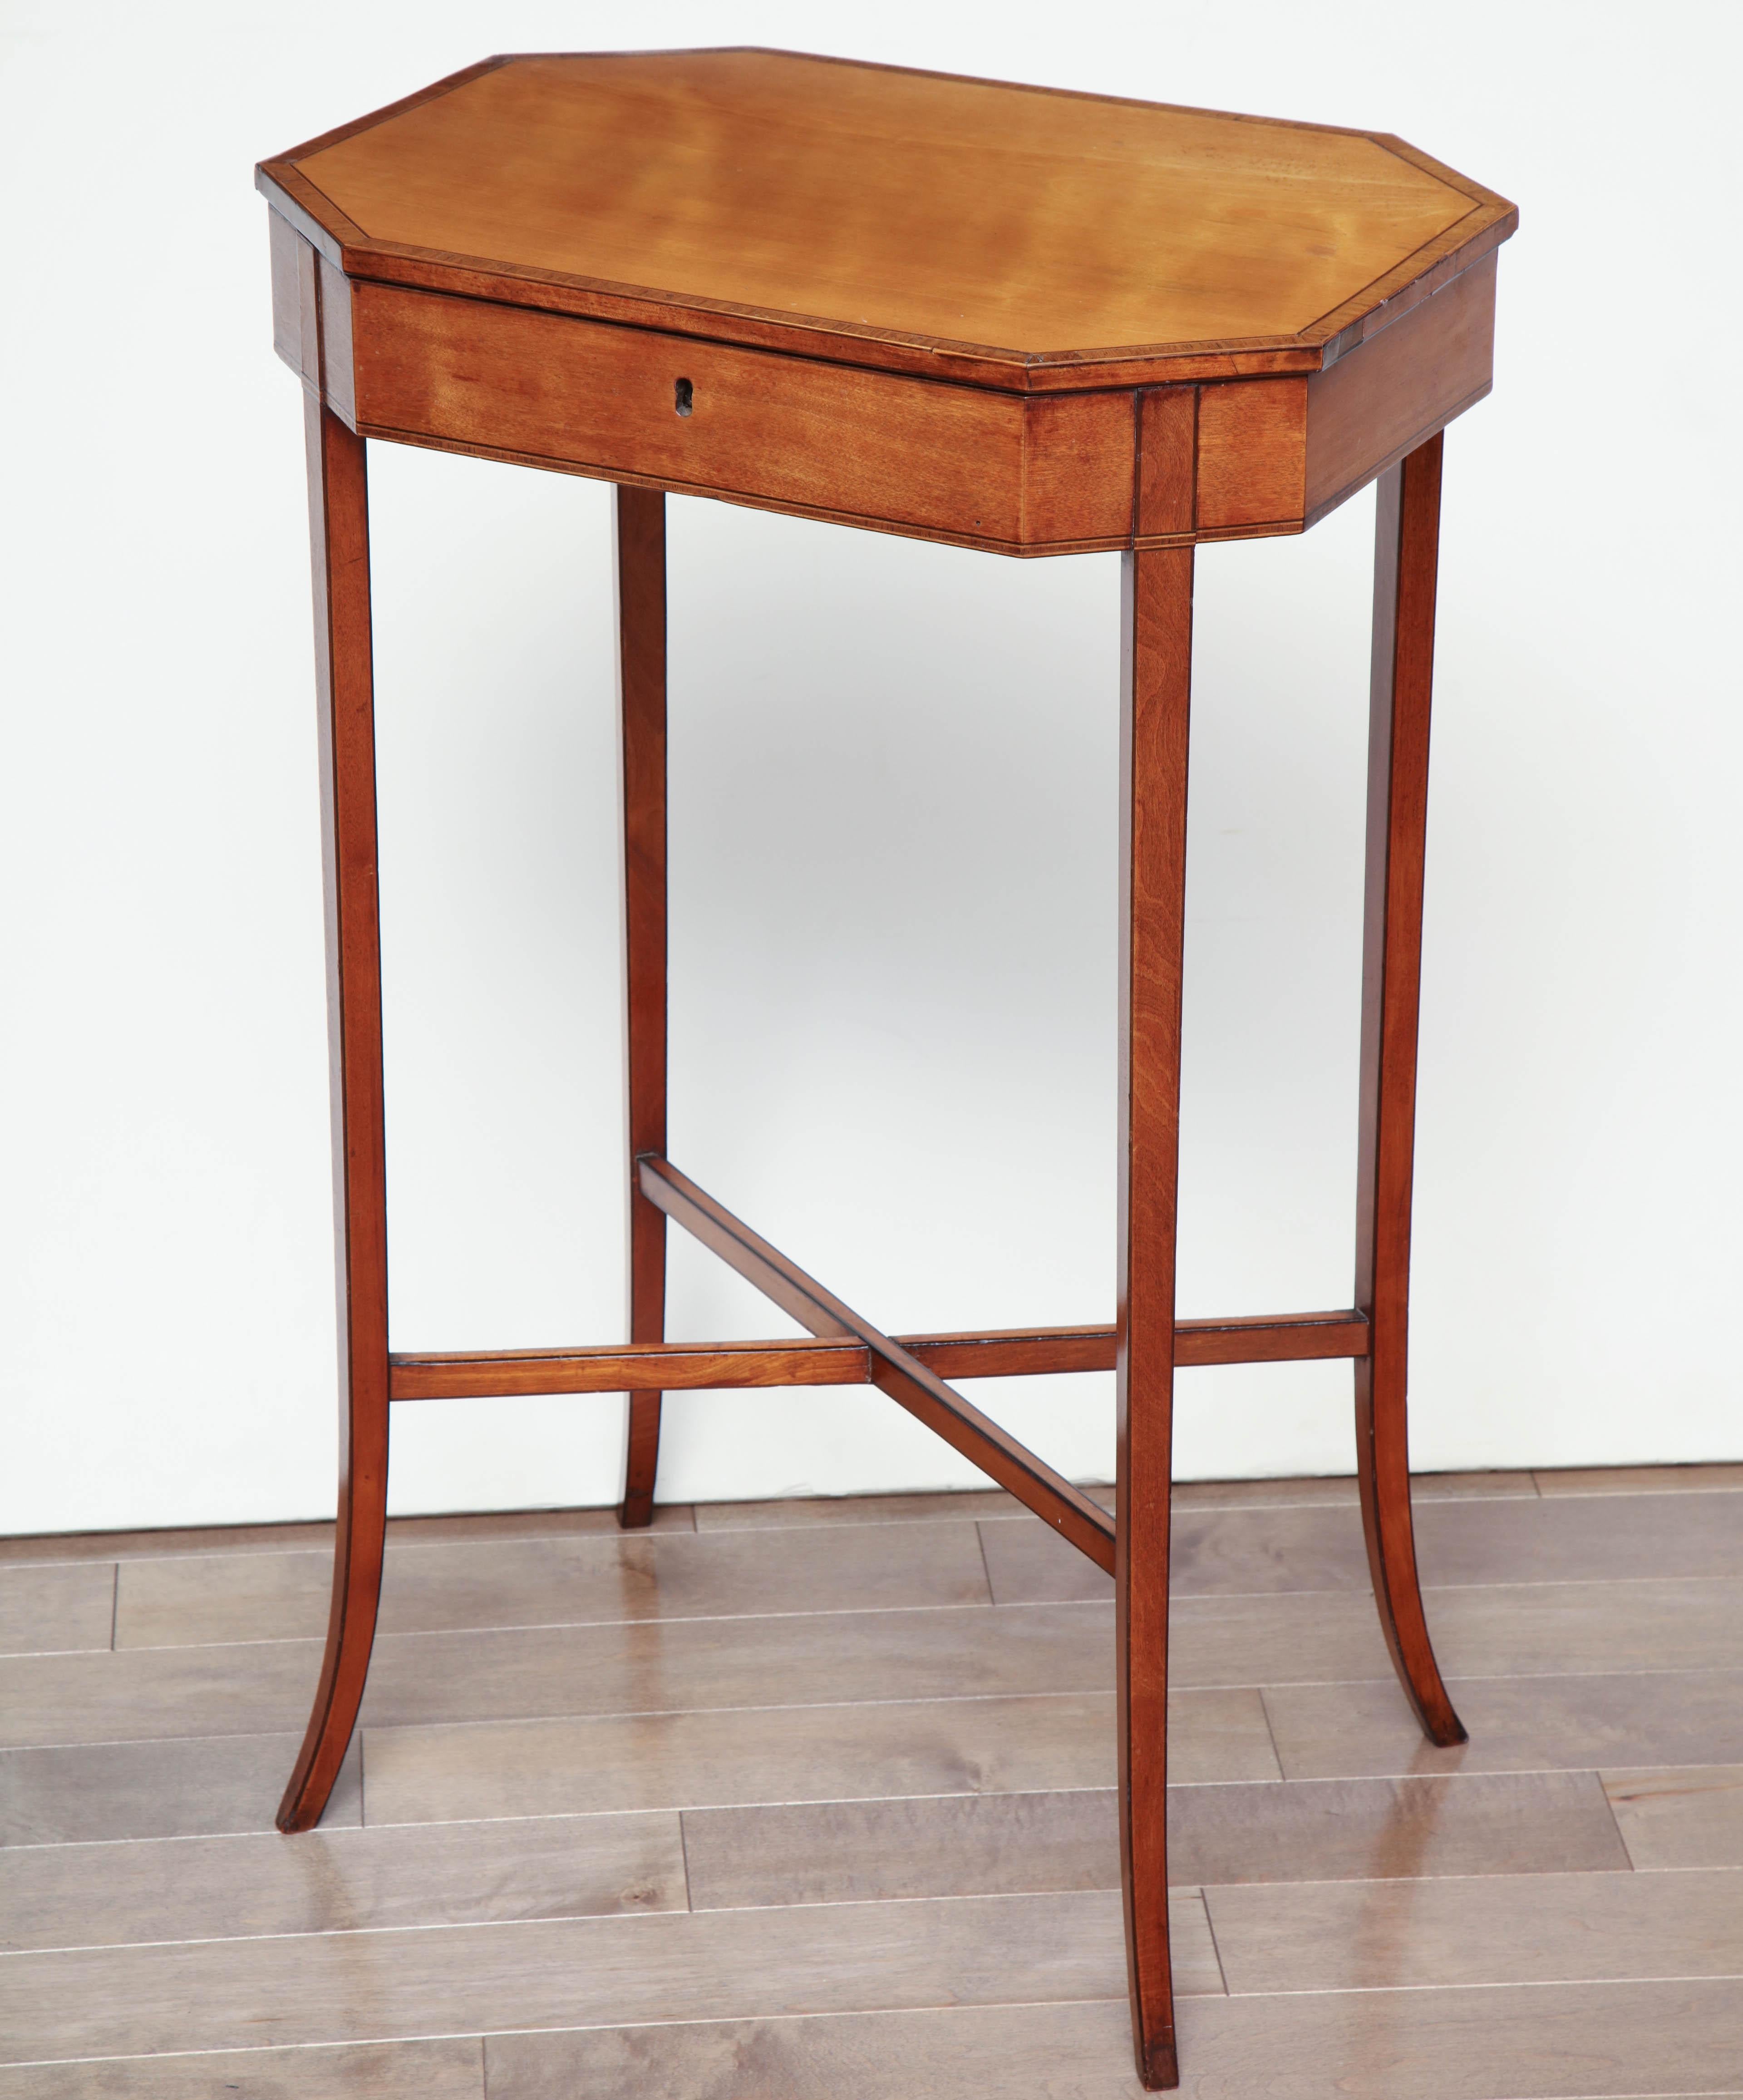 Mid-19th century English, Sheraton style, satinwood side table with top that opens, no drawer.